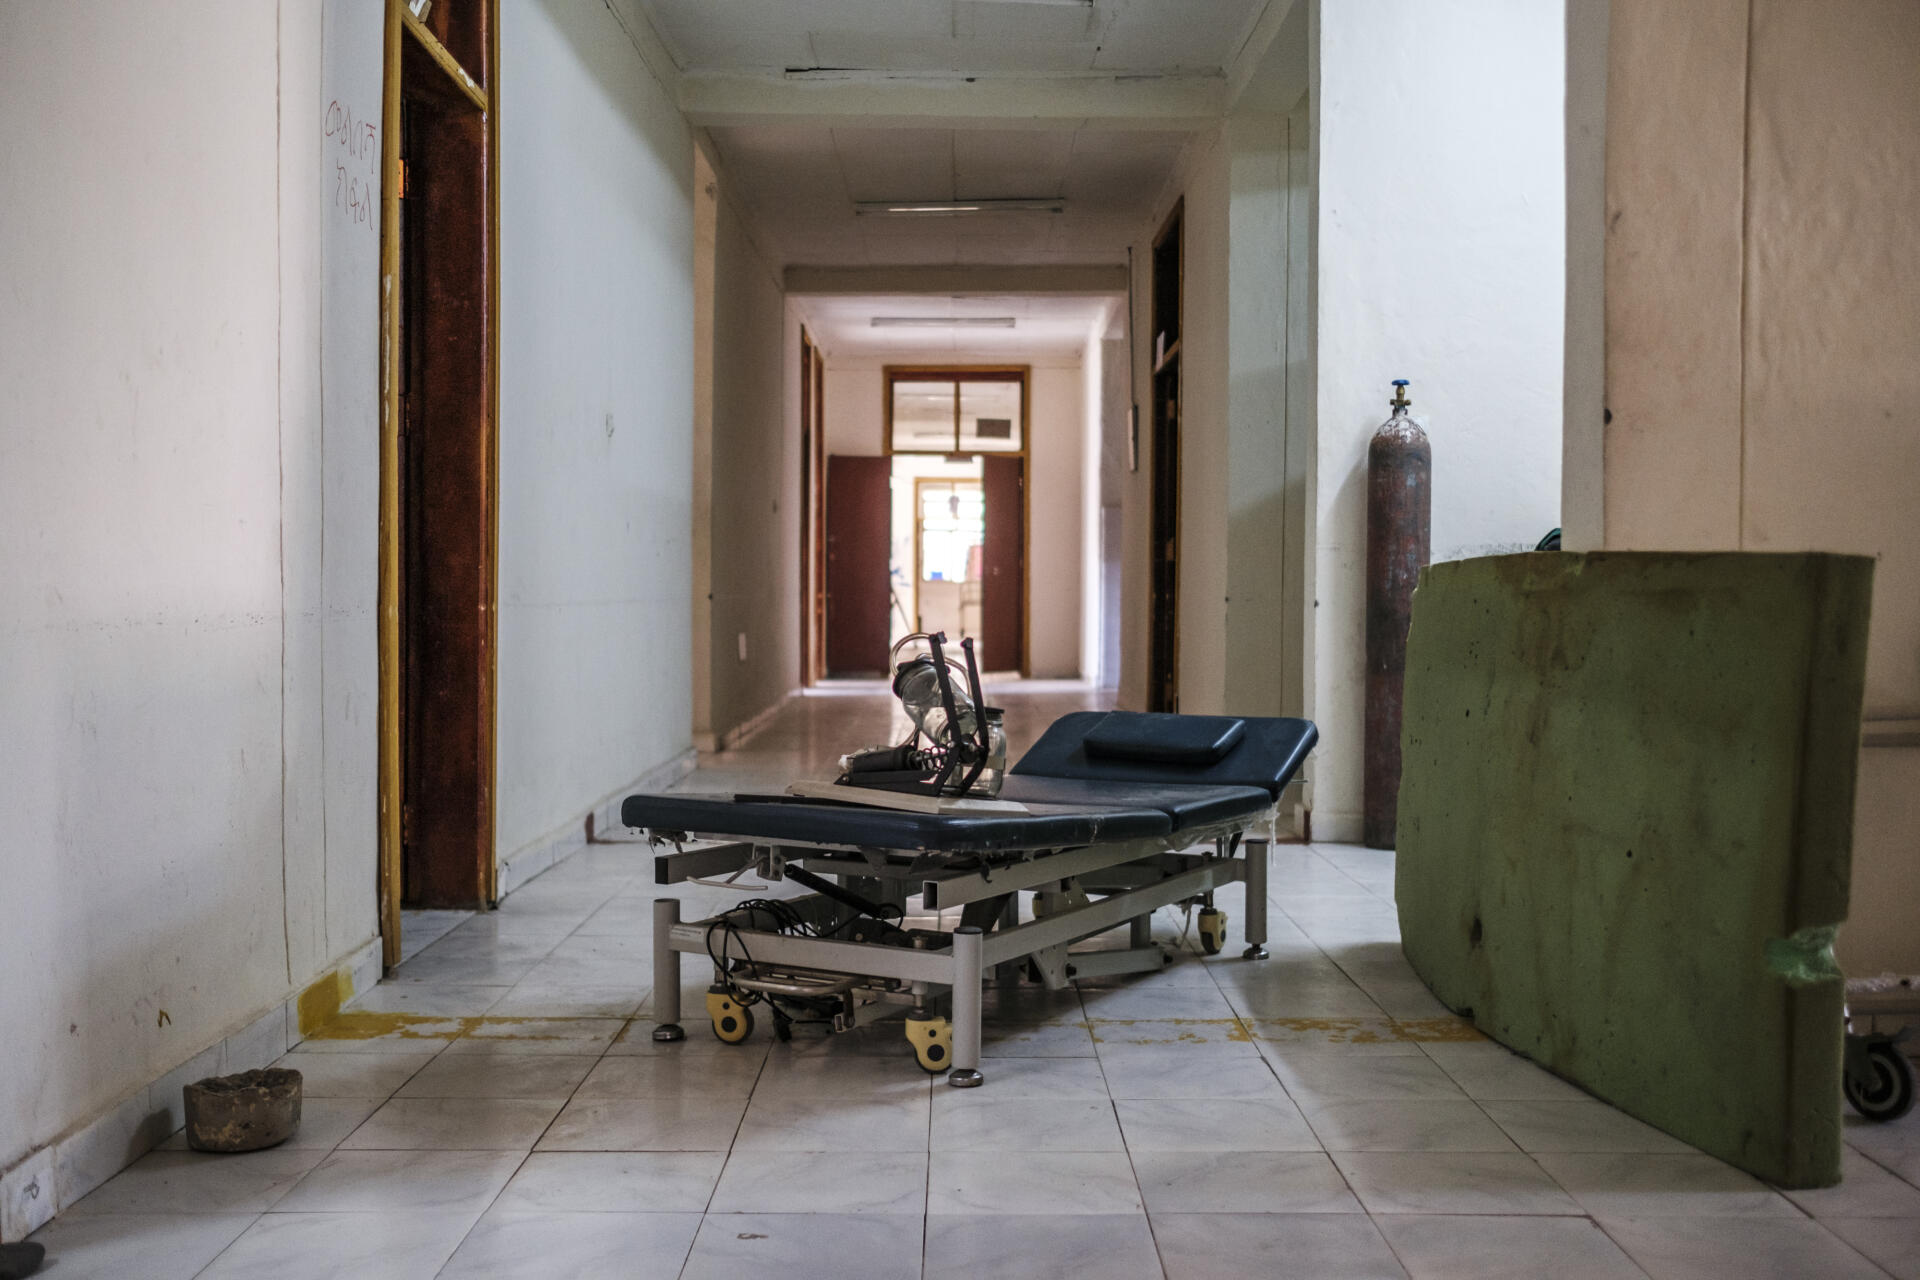 View of a vandalized ward at Shewa Robit hospital in Ethiopia on December 9, 2021. The hospital was looted by Tigray forces when they occupied the town.